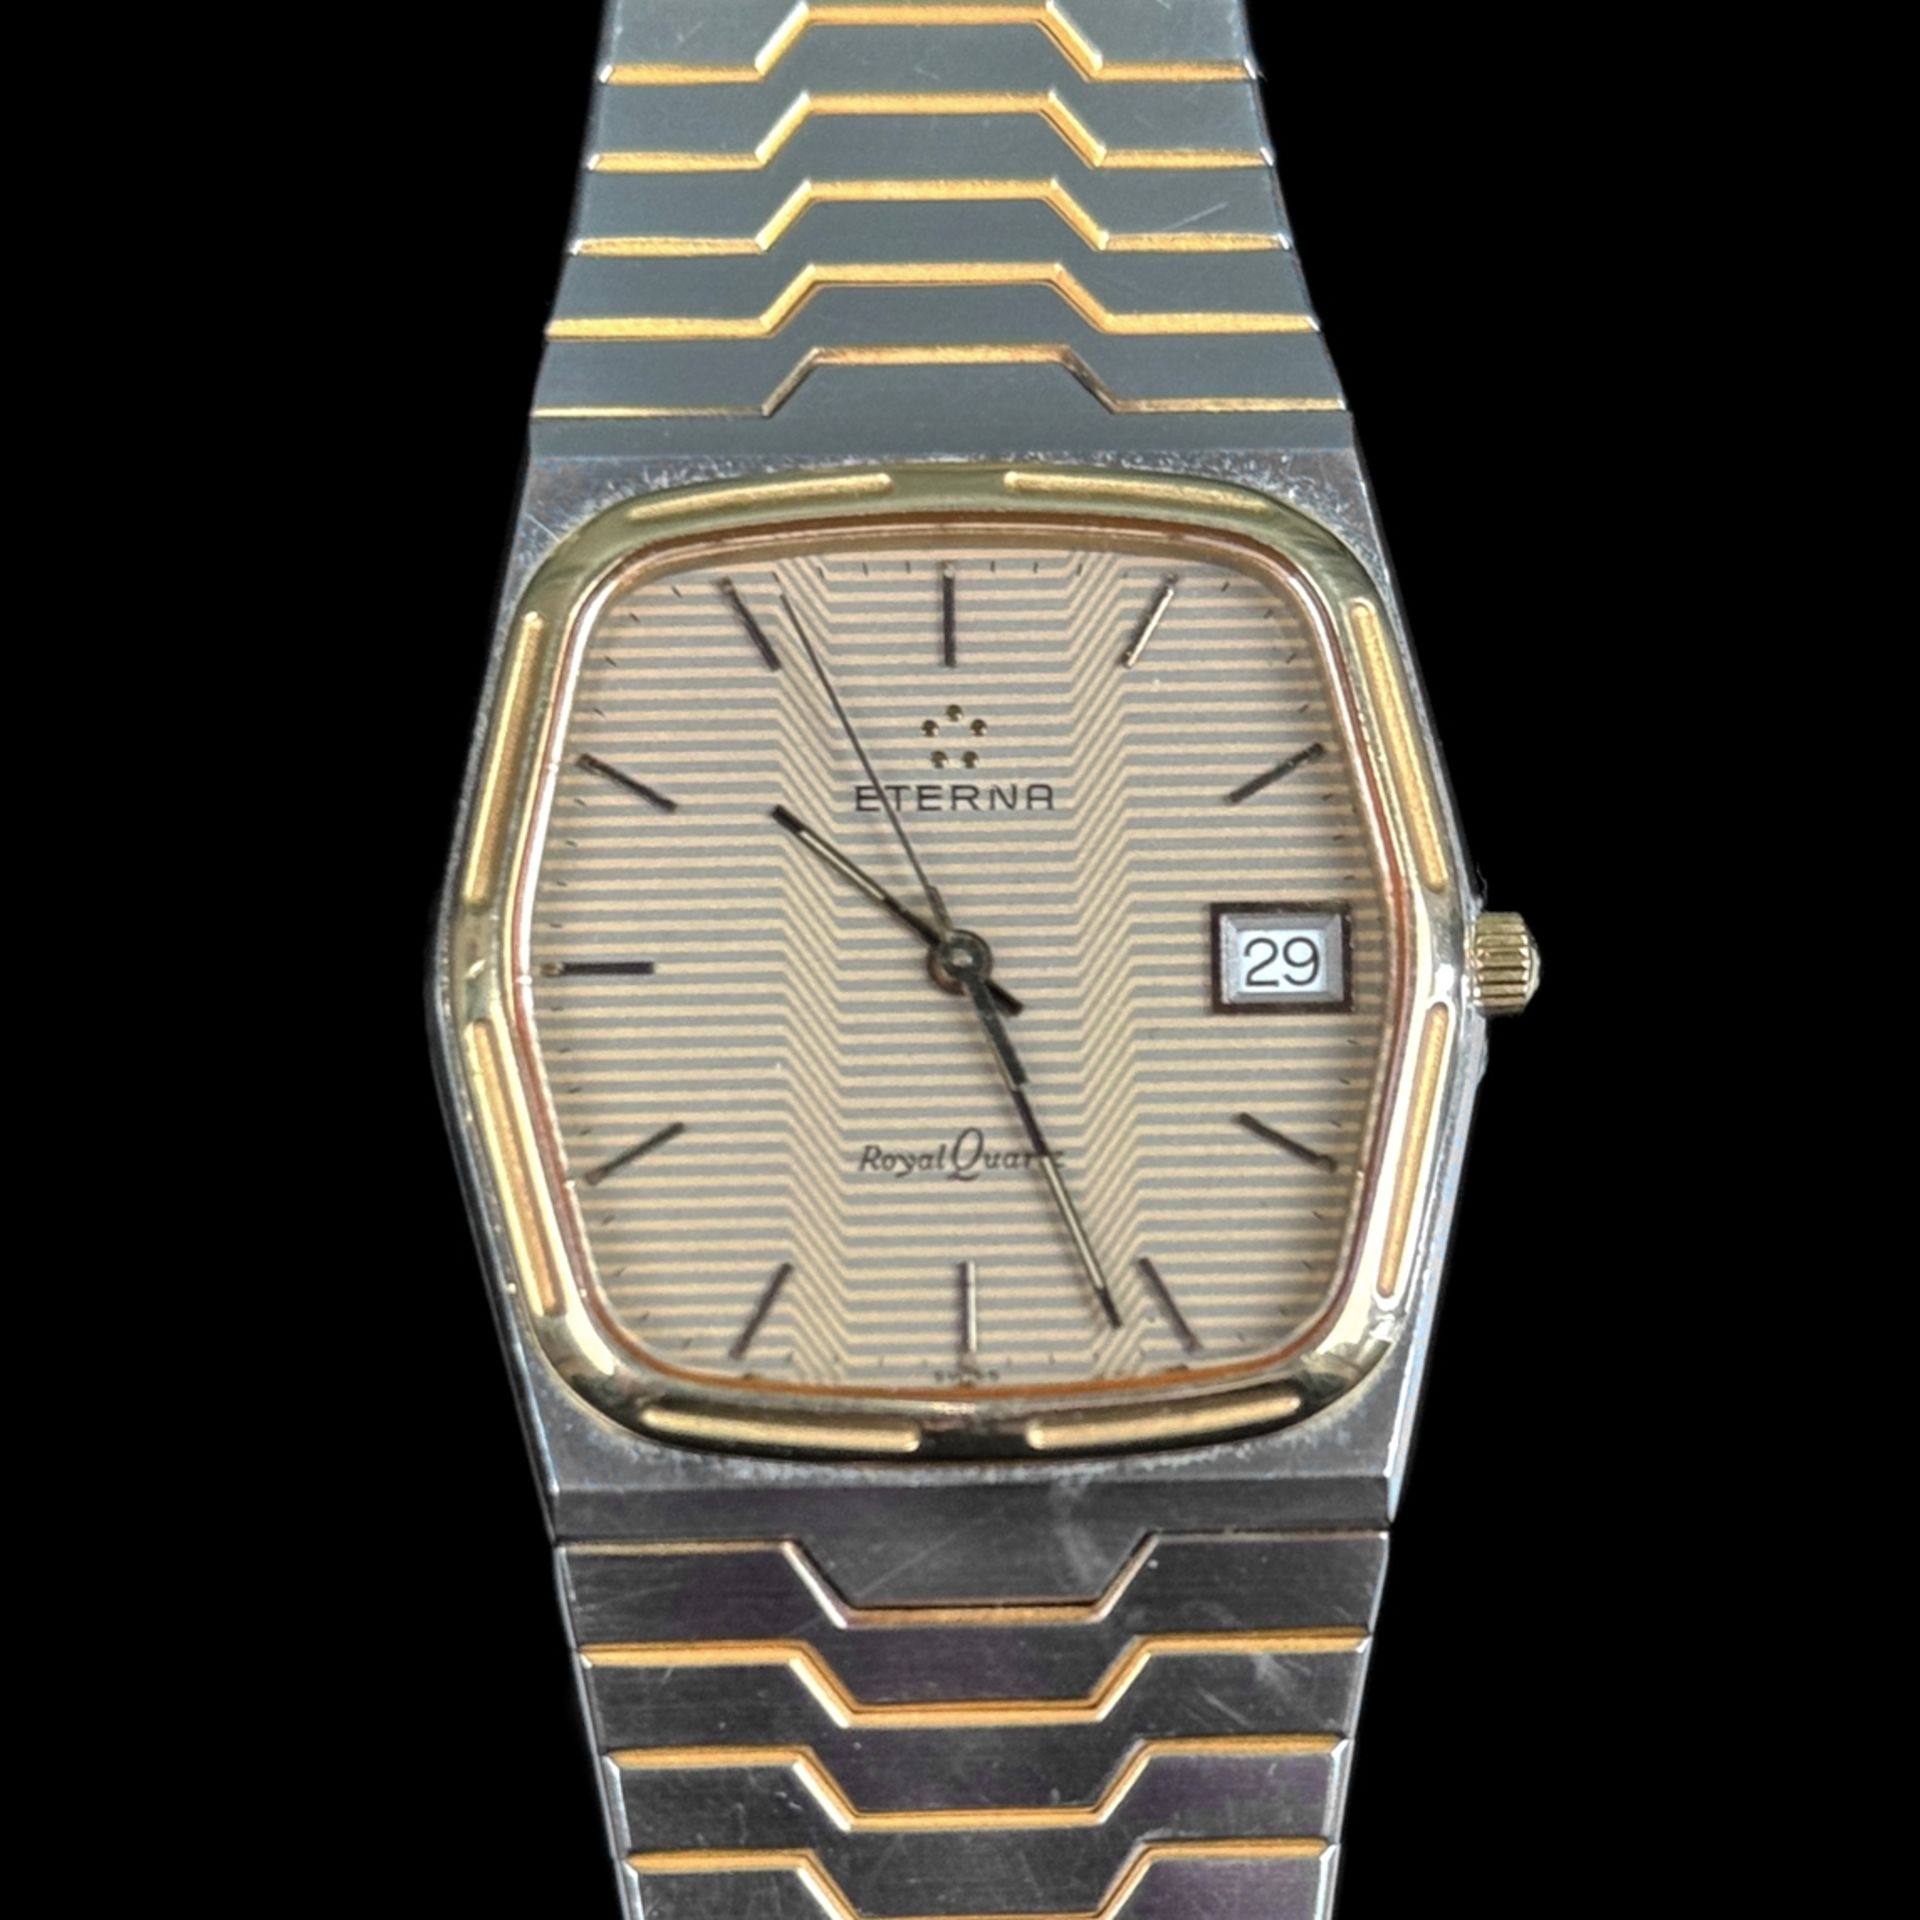 Wristwatch, Eterna Royal, quartz, running, circa 1980, dial with indices. Date display at number 3, - Image 2 of 3